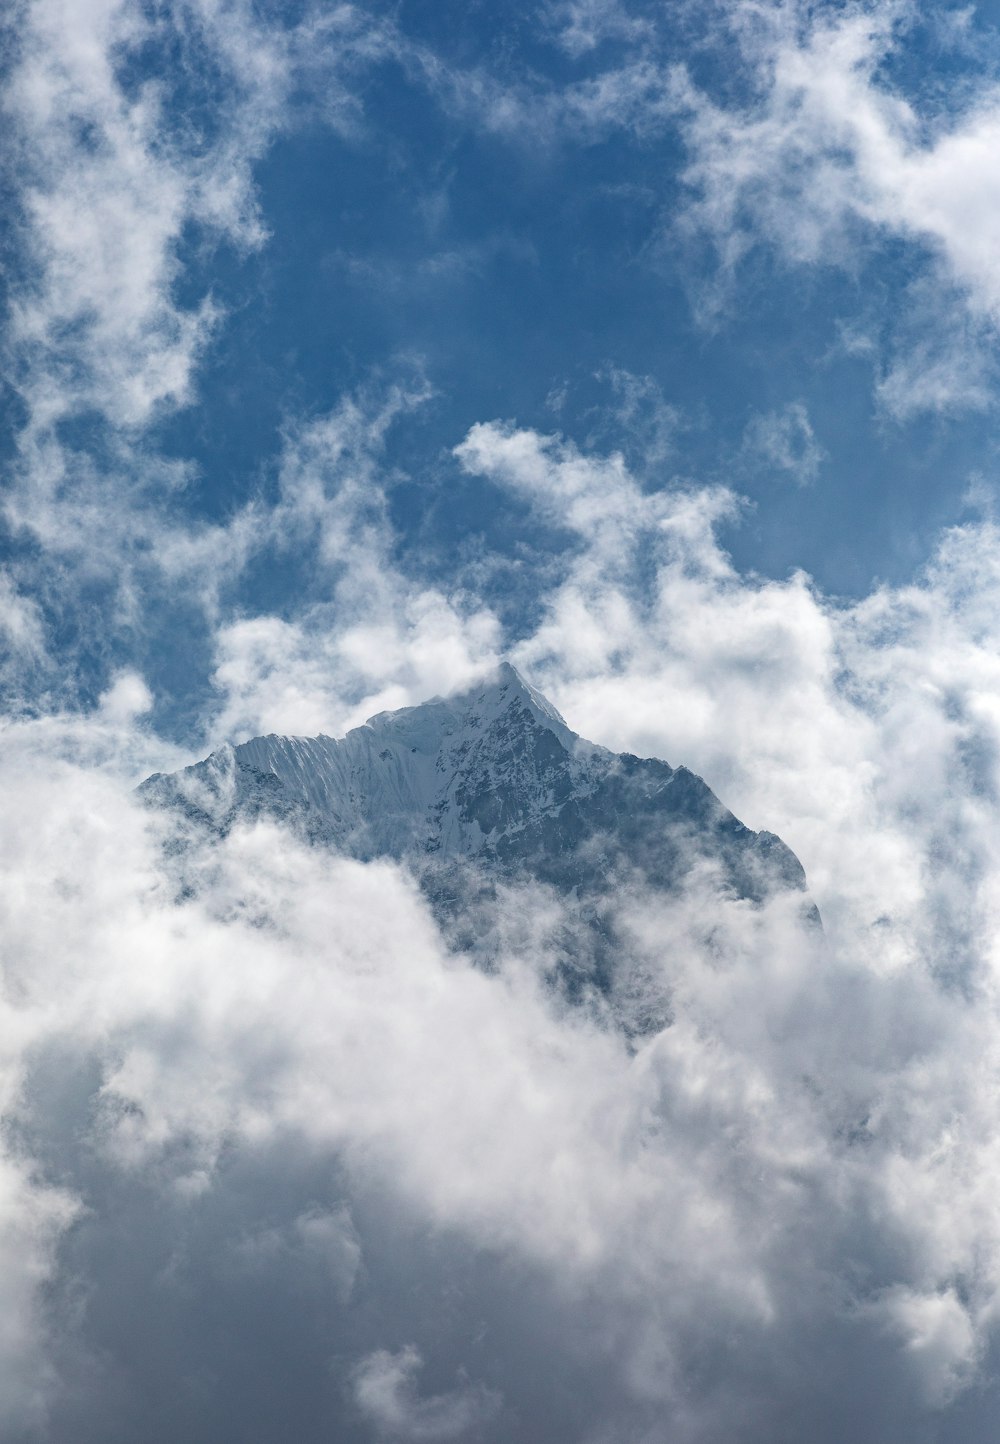 a large mountain covered in clouds under a blue sky